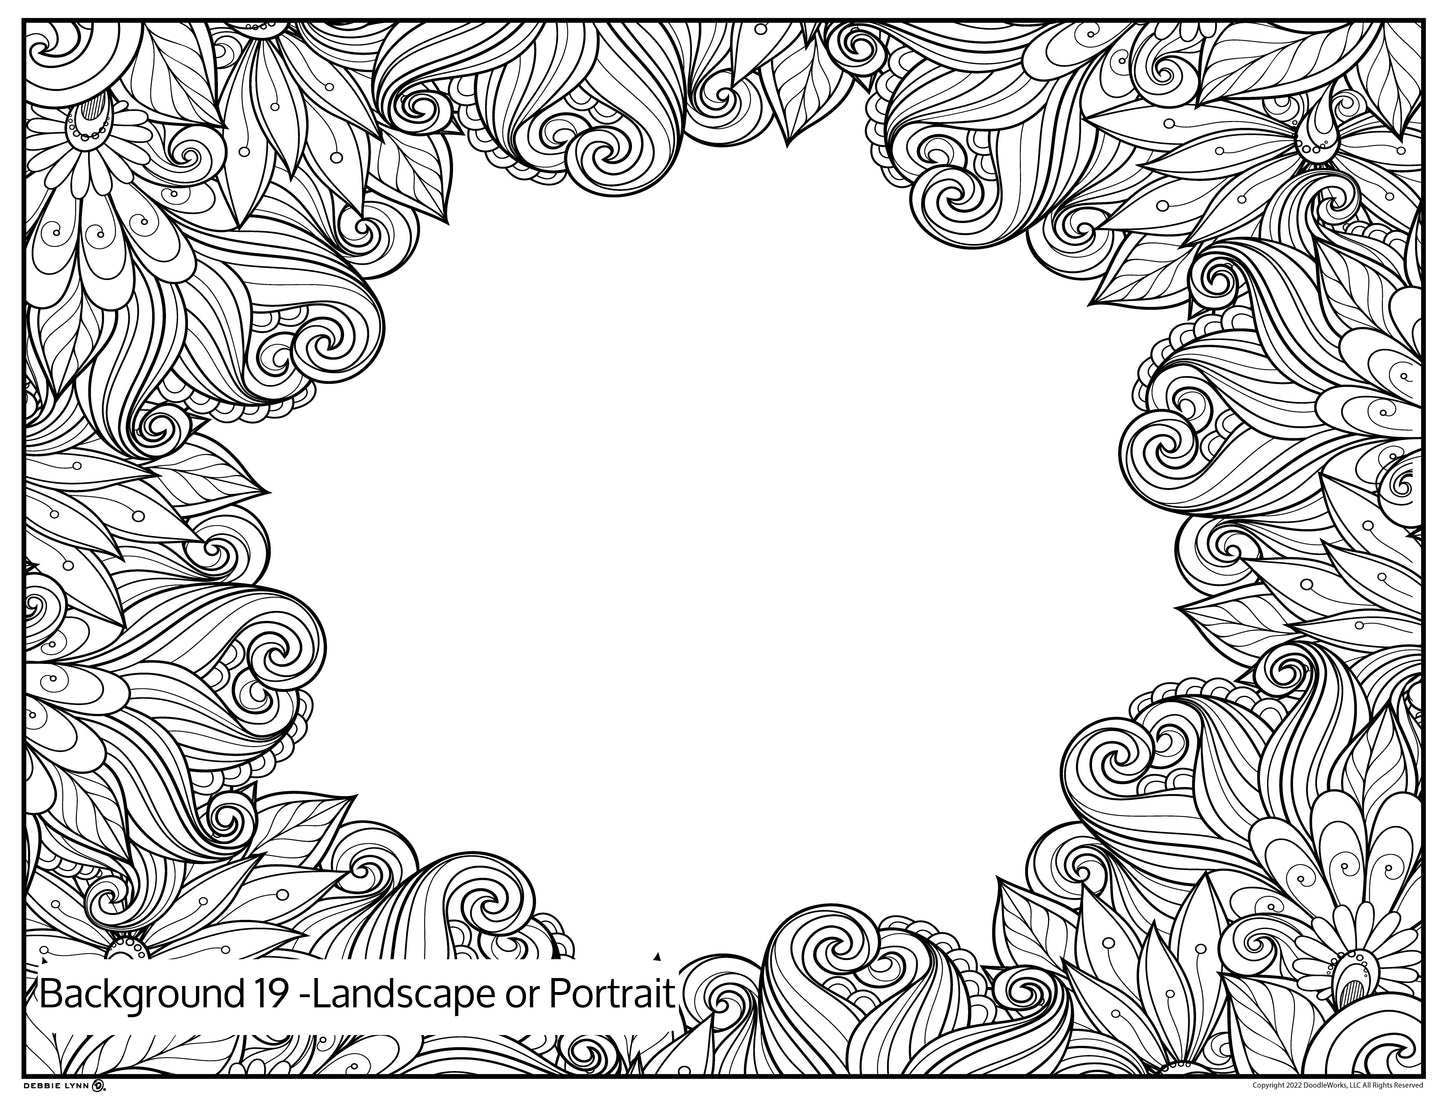 Background 19 Custom Personalized Giant Coloring Poster 46"x60"